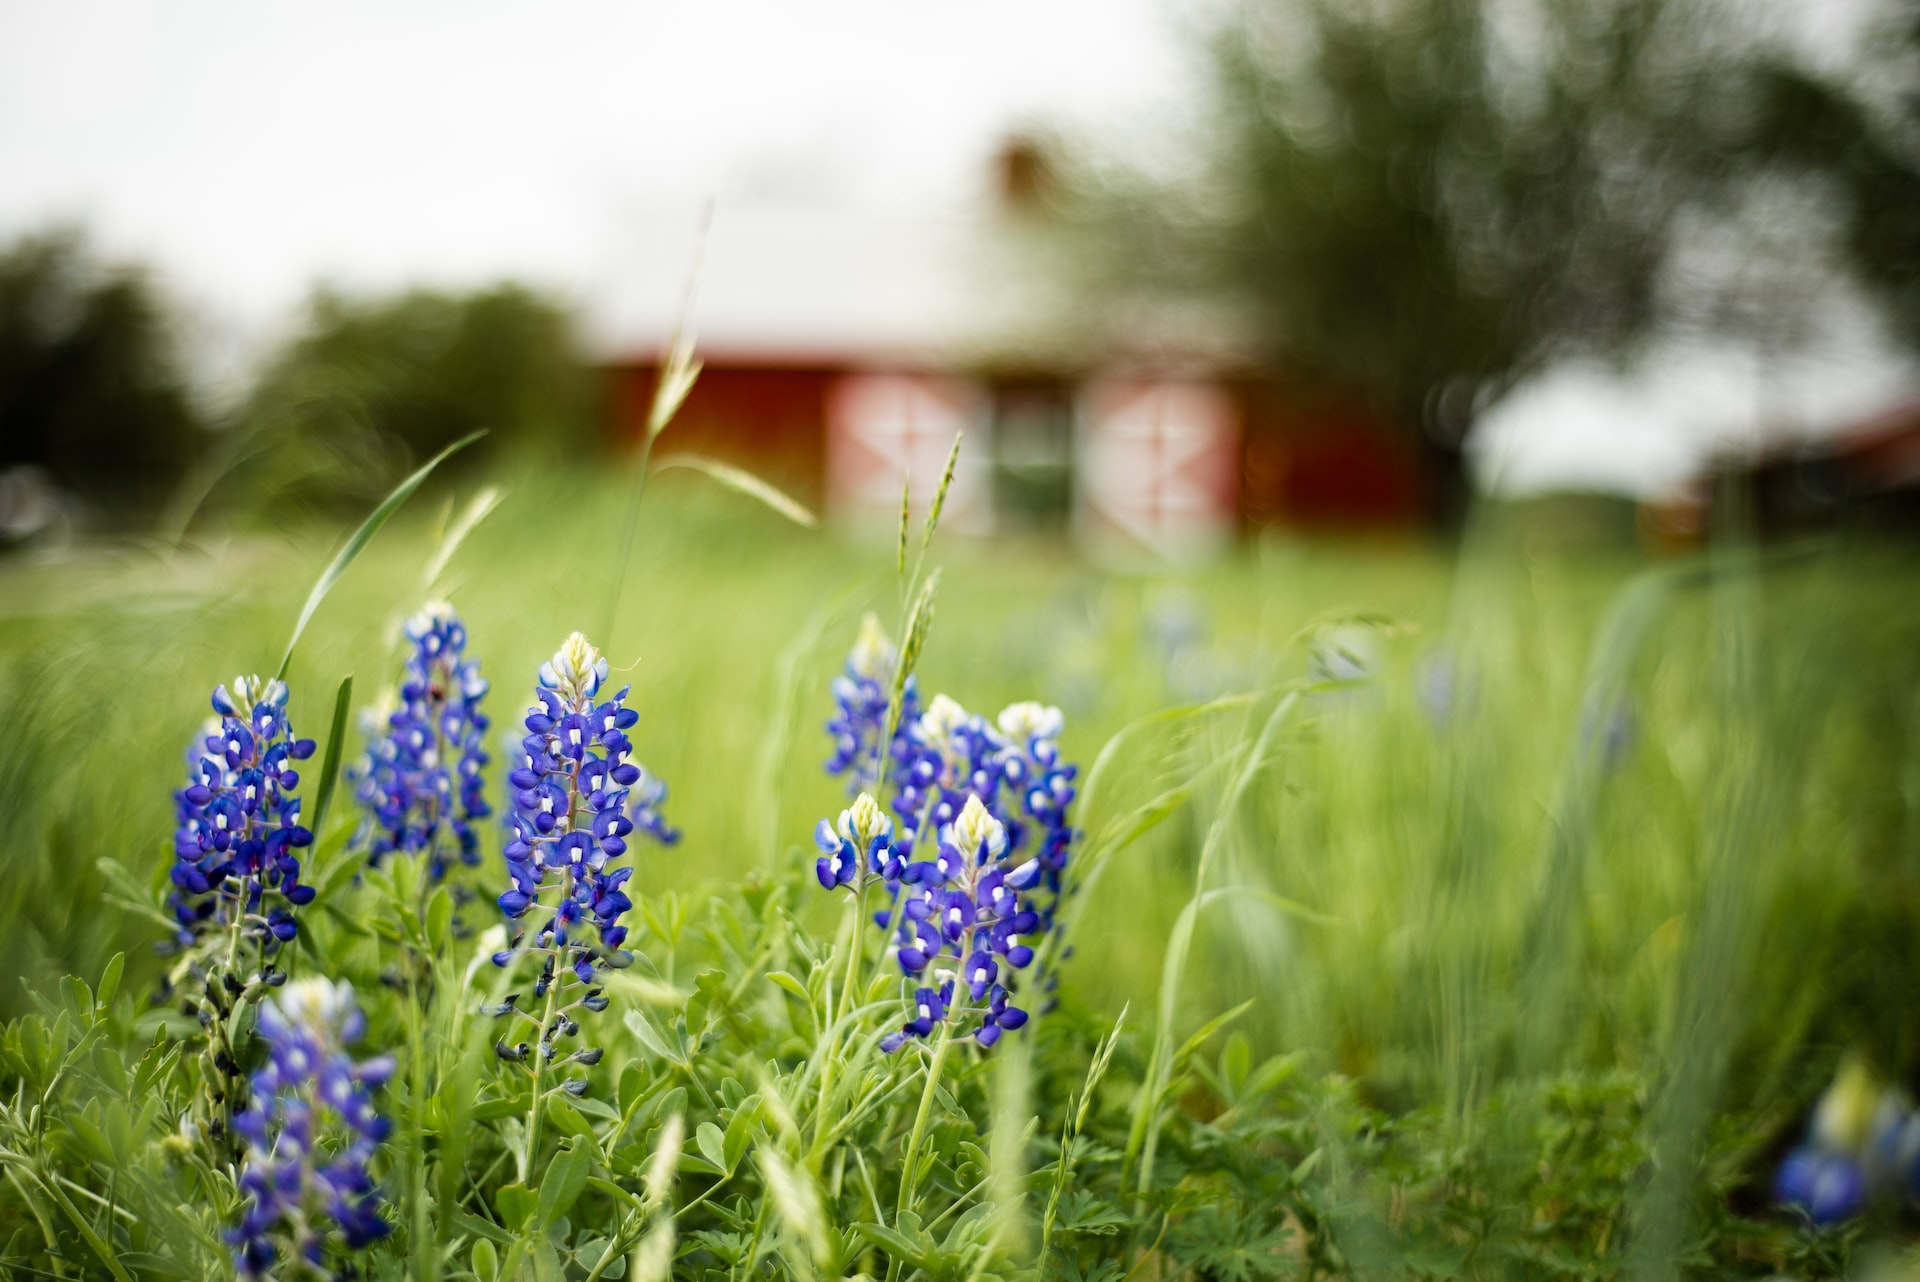 When and Where to Find Bluebonnets in Texas